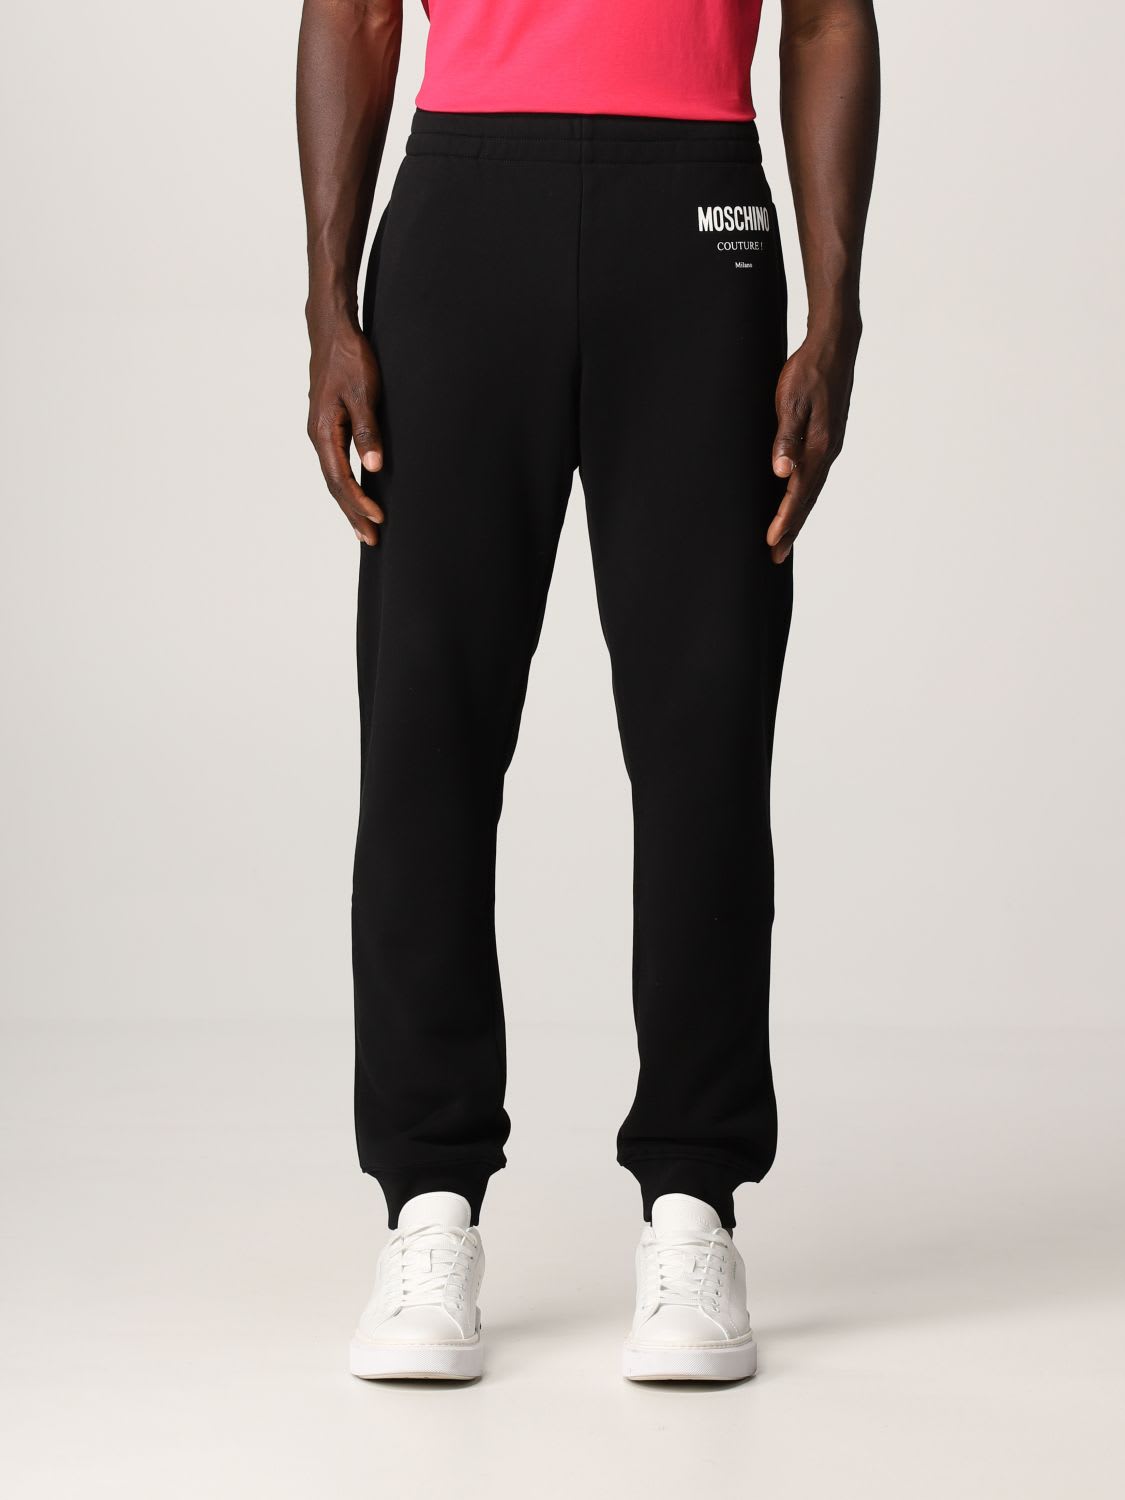 Moschino Couture Pants Moschino Couture Cotton Jogging Pants